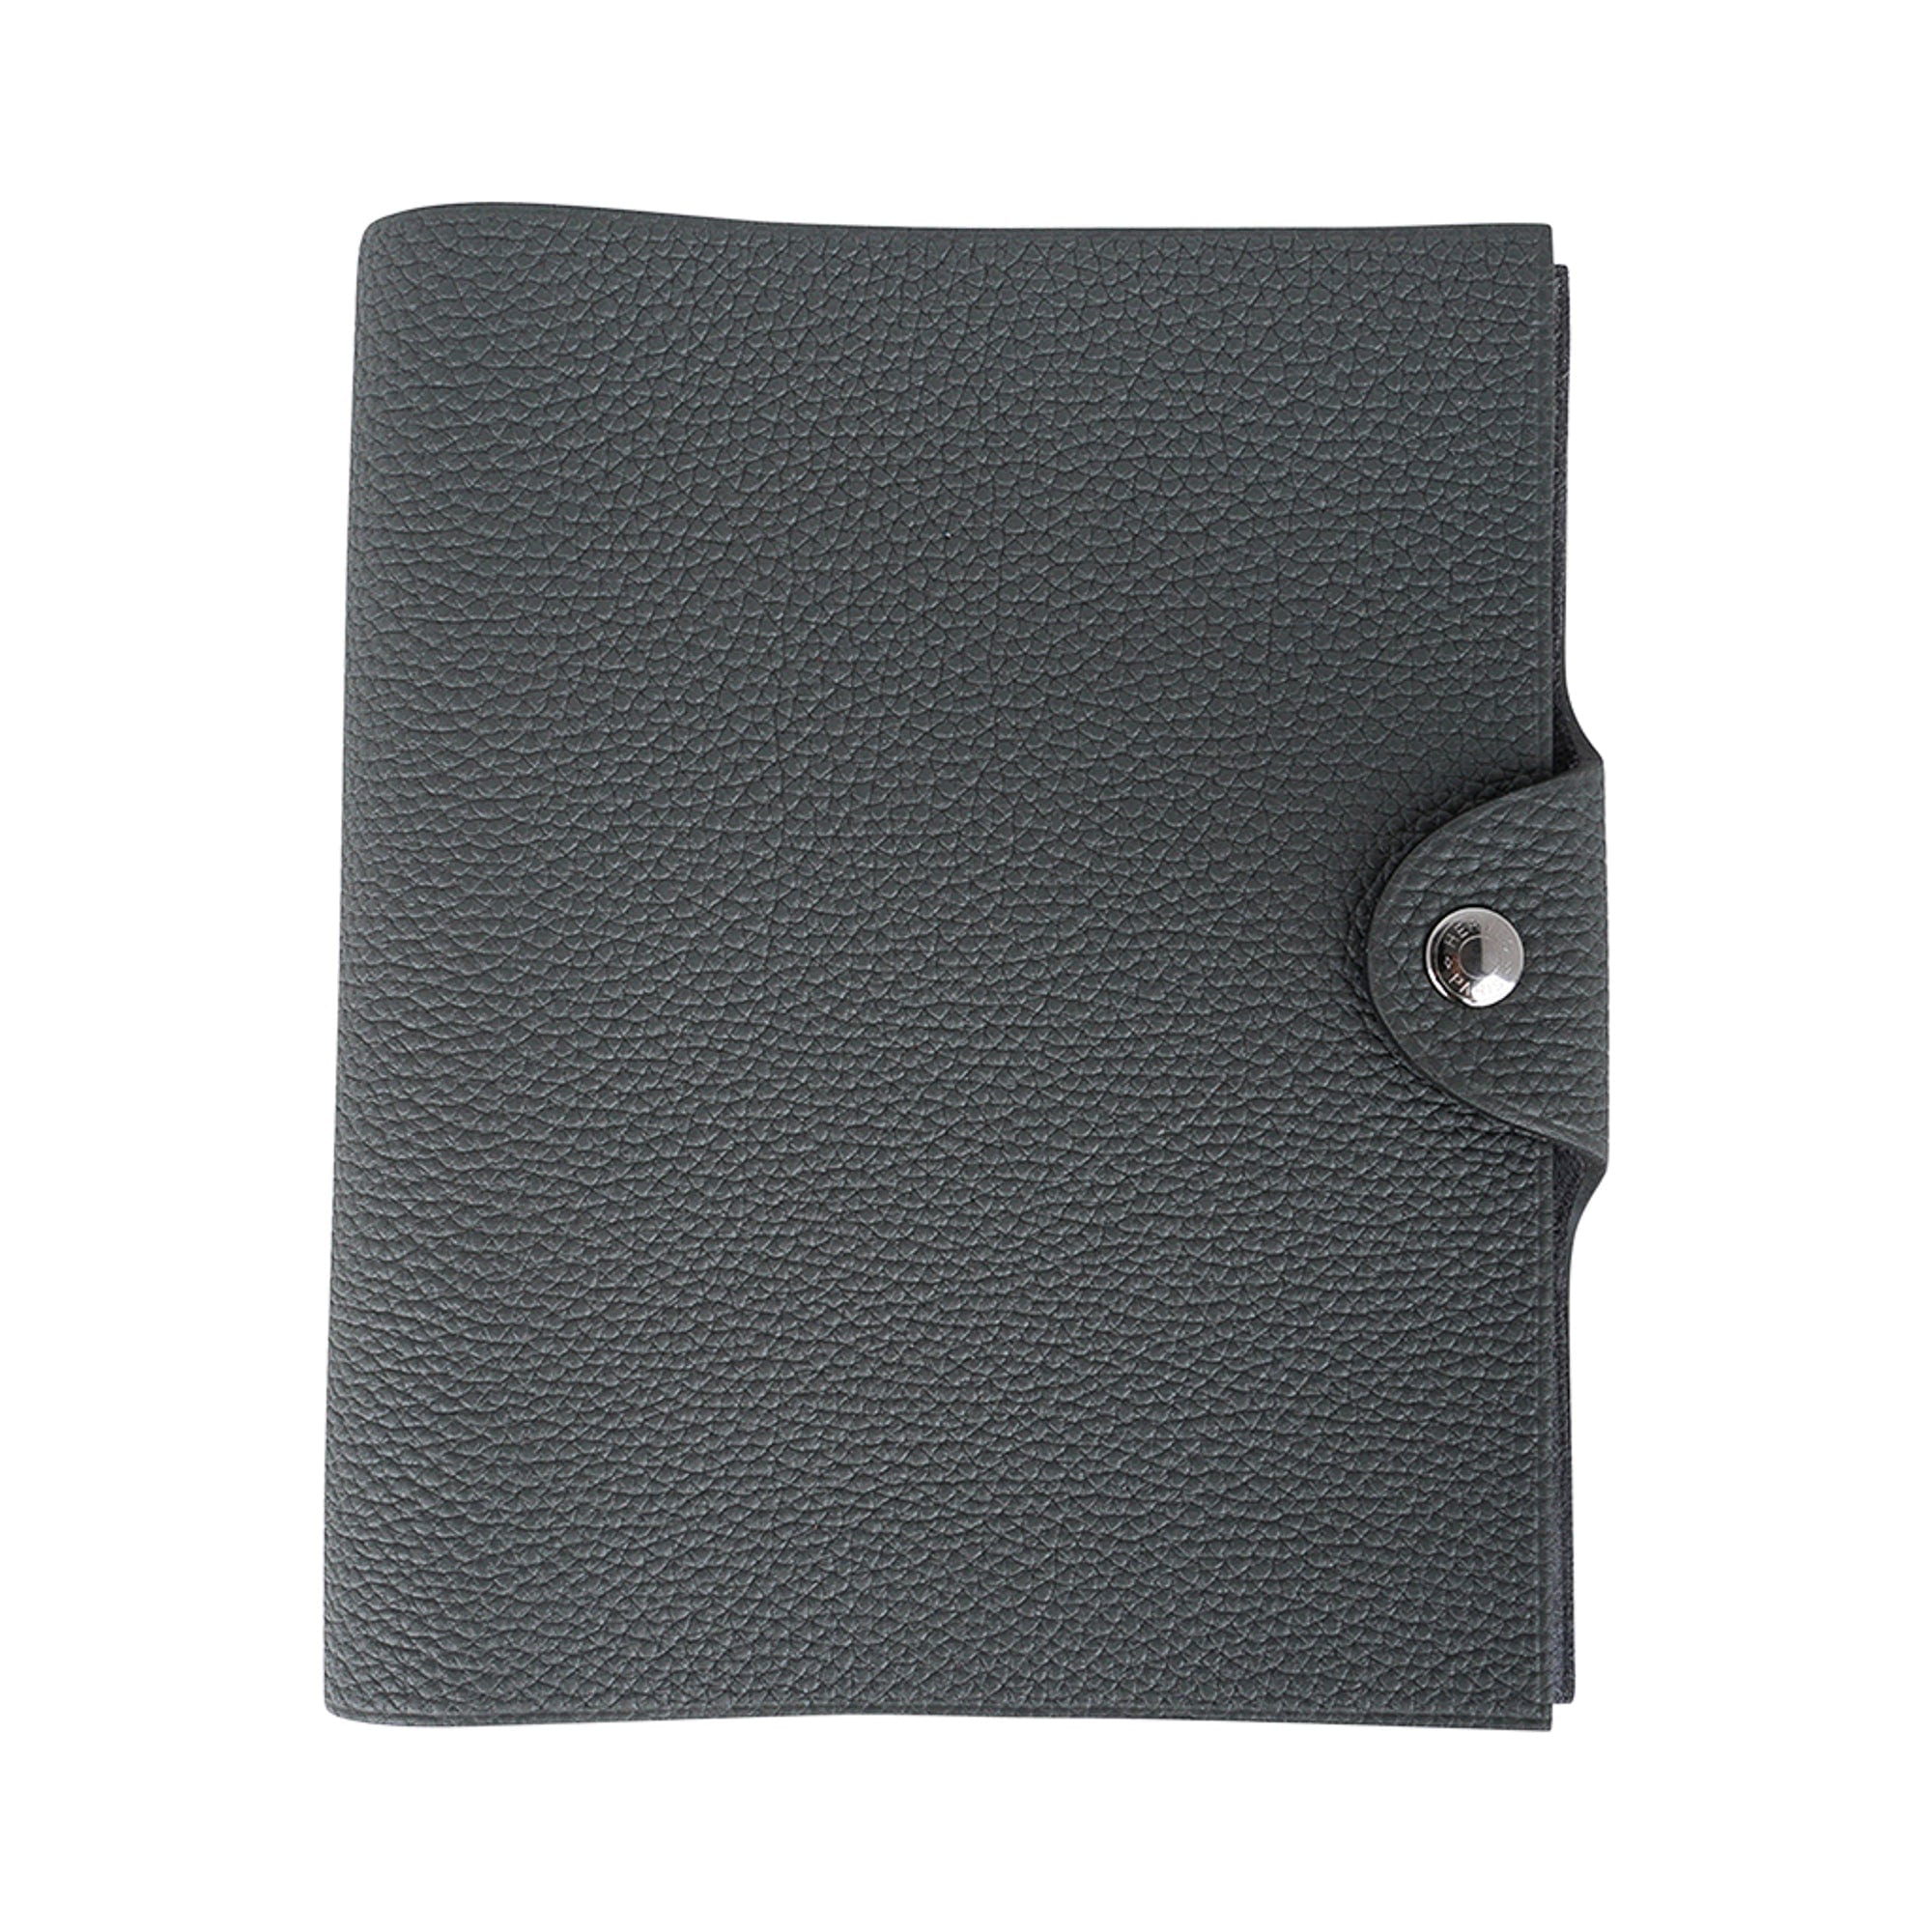 Hermes Ulysse PM Notebook Cover Vert Amande with Refill